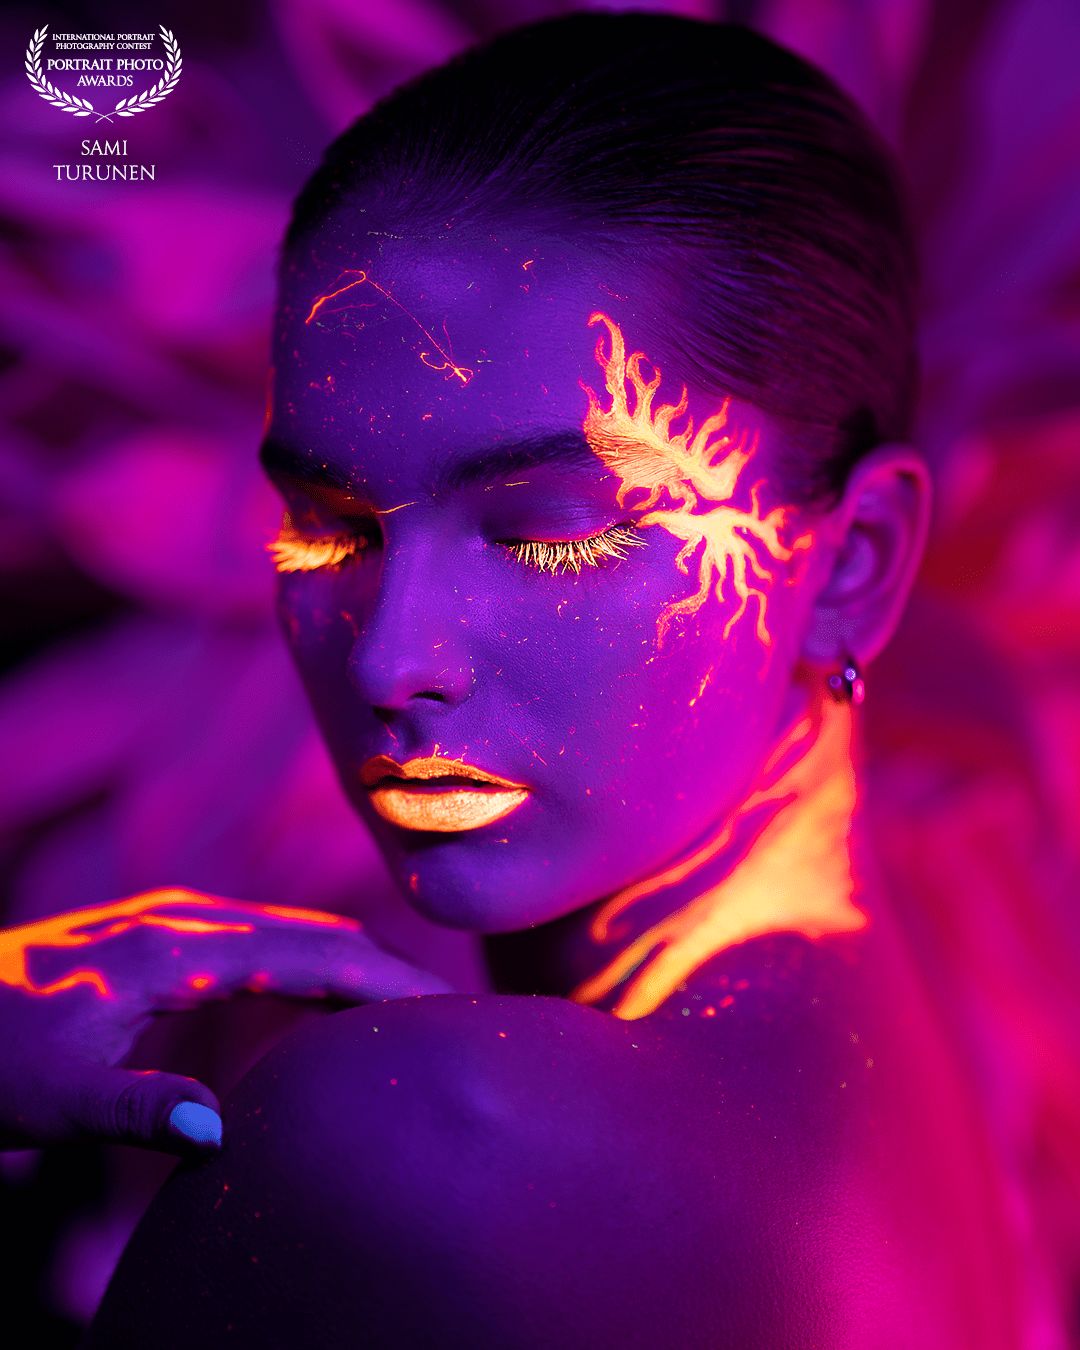 Ultraviolet photo. I used a mix of UV and RGB led light in this one. Big thanks to our stunning model Oona Antila and stylist Katarina Kantanen. Good team makes a difference.